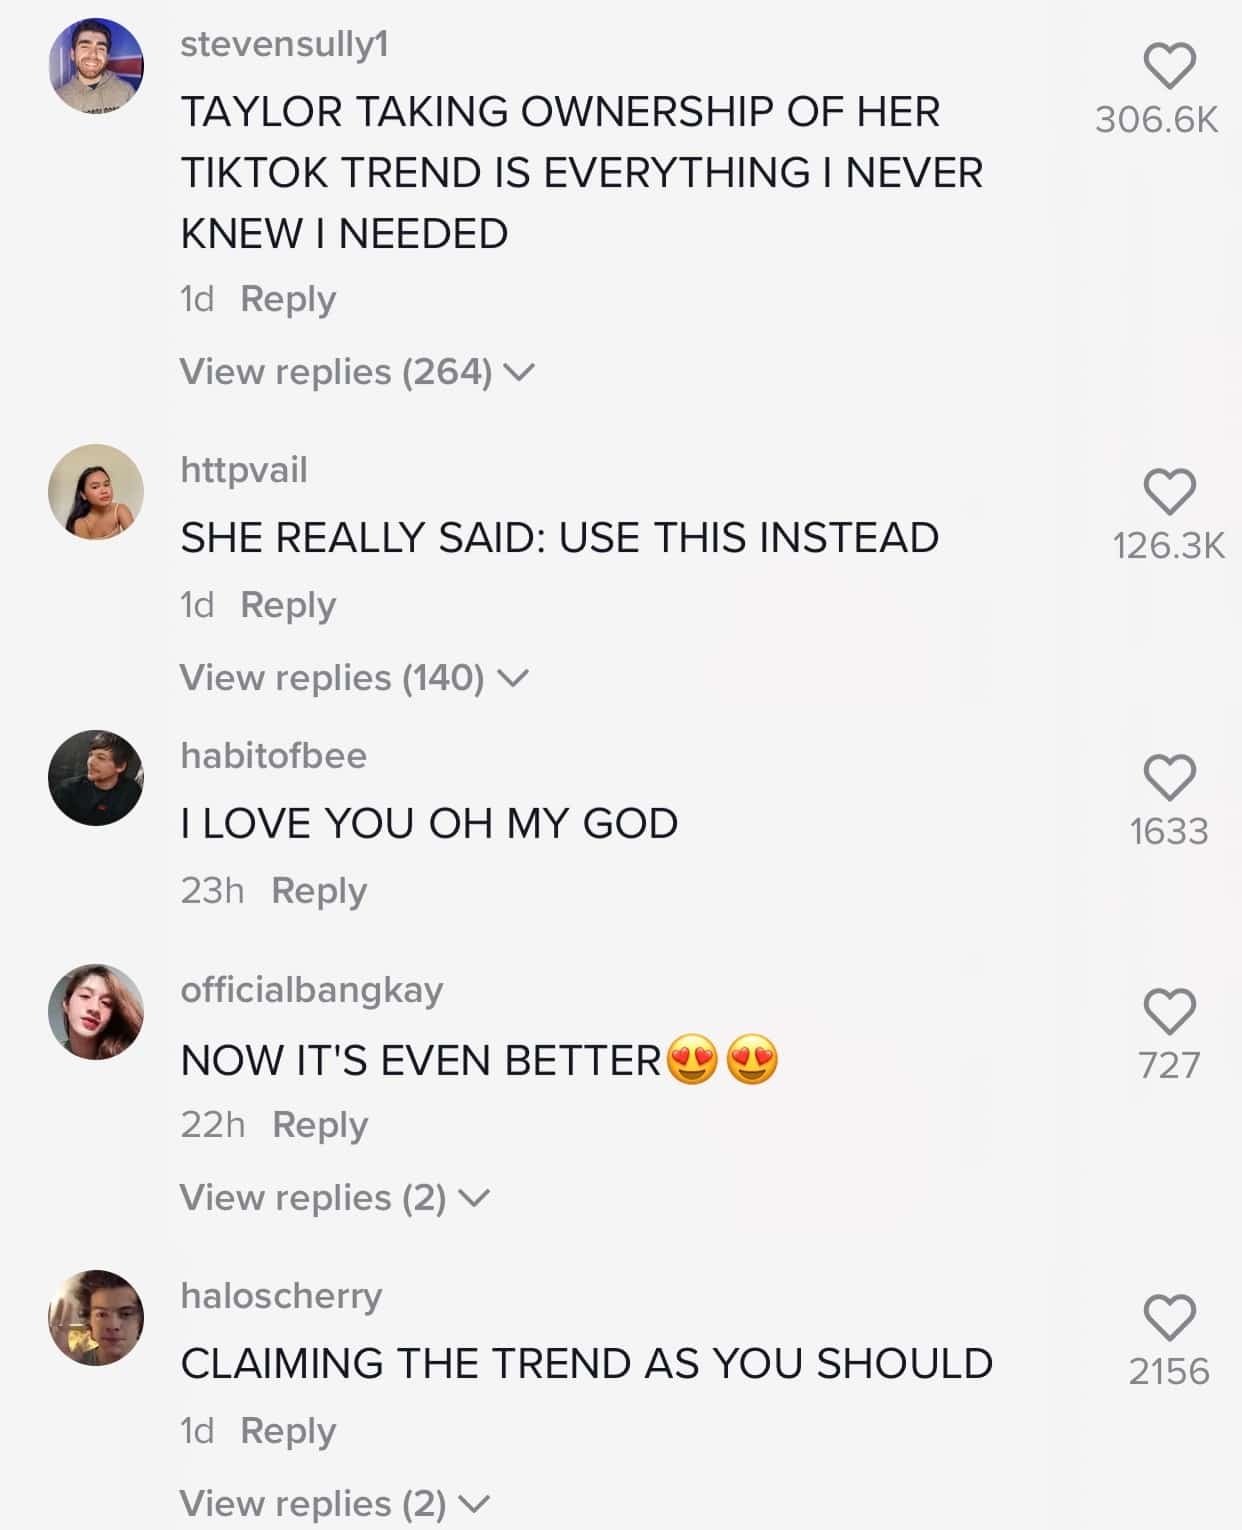 Comments underneath a TikTok by Taylor Swift